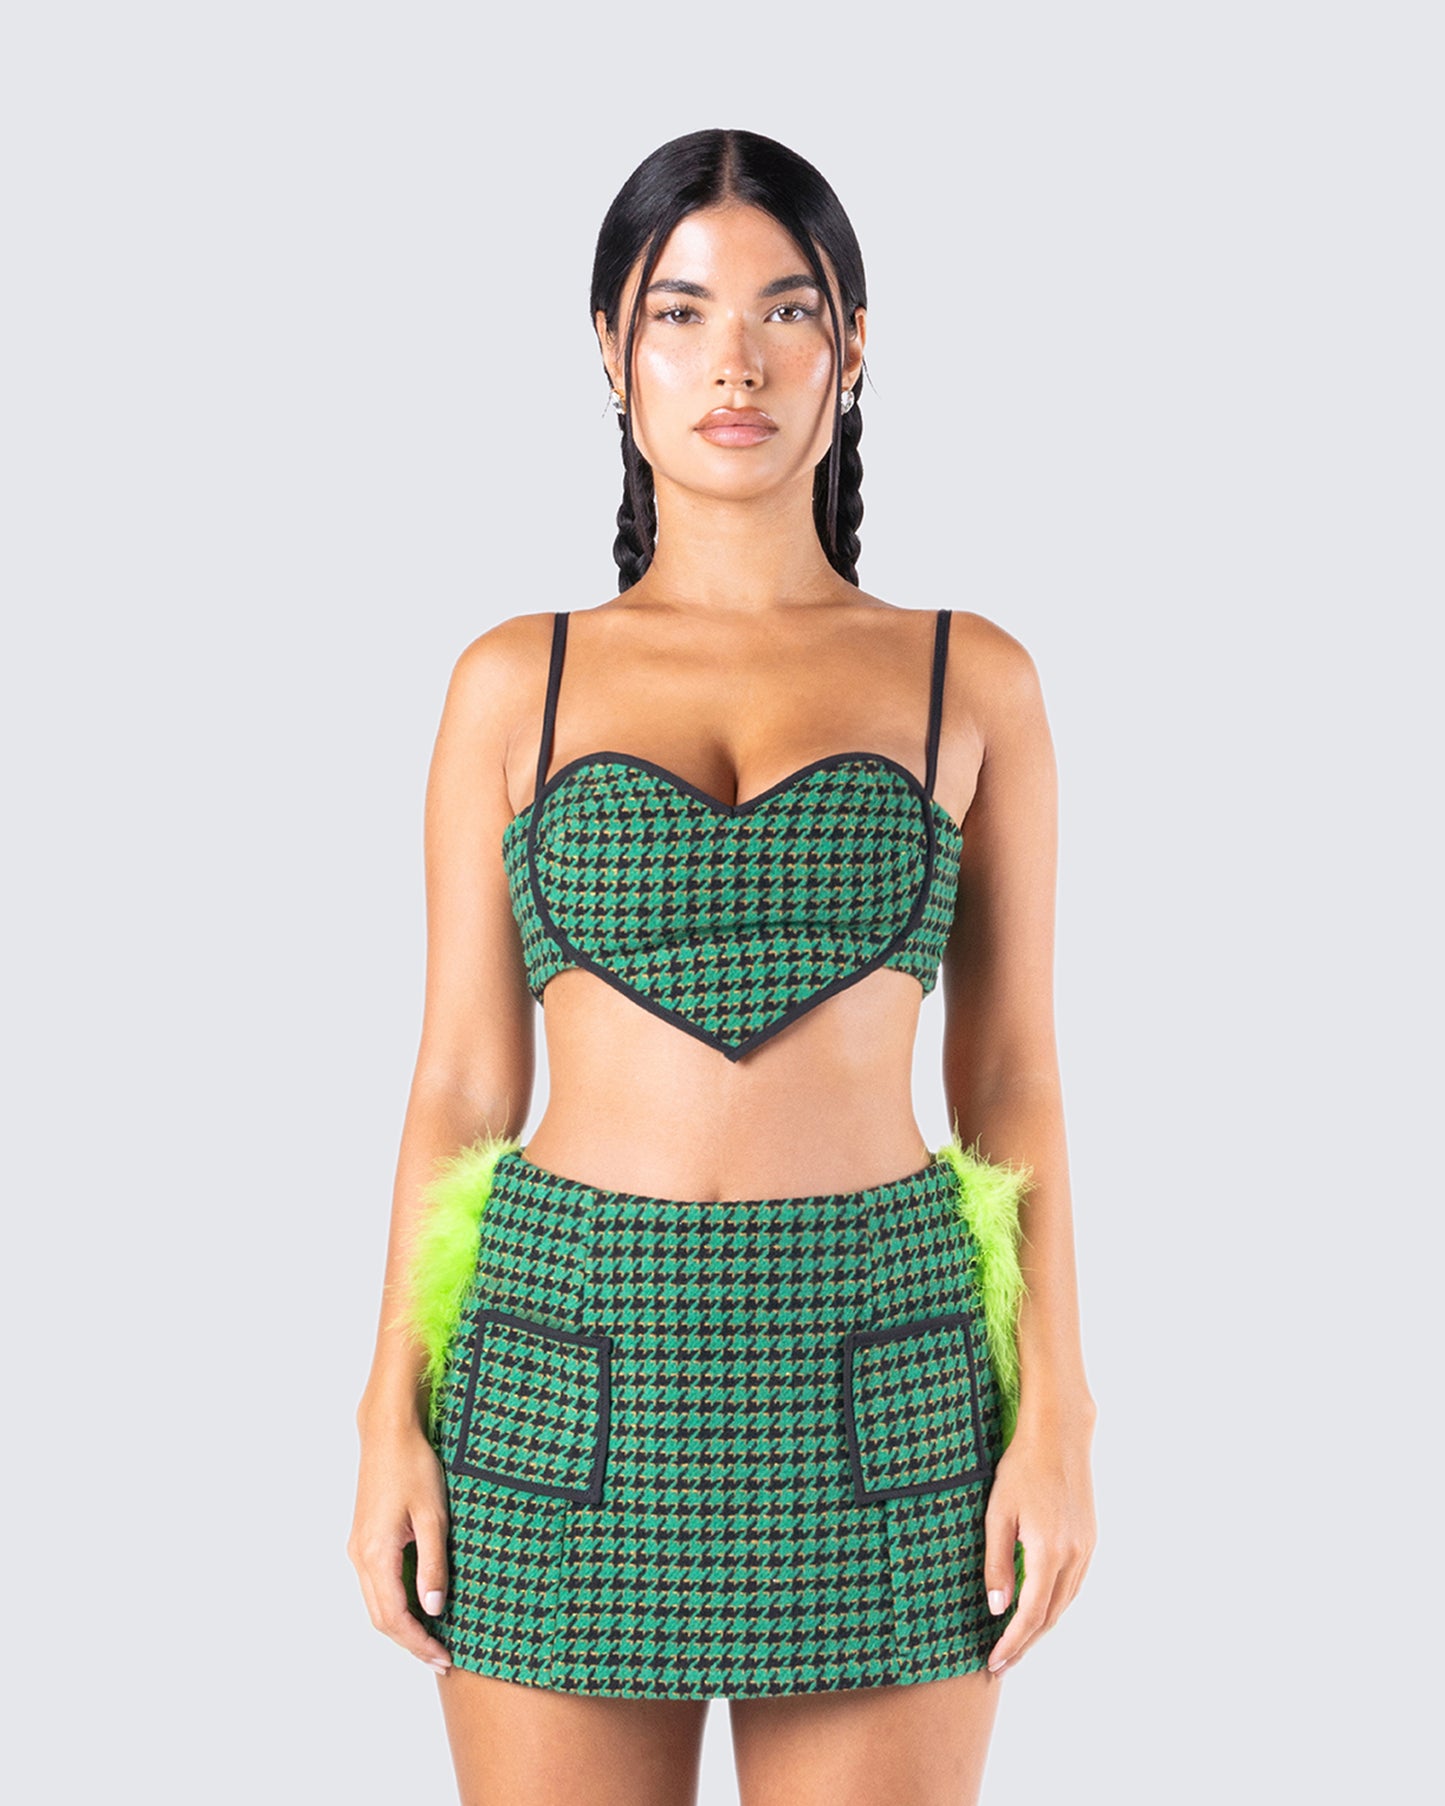 Misty Green Houndstooth Top